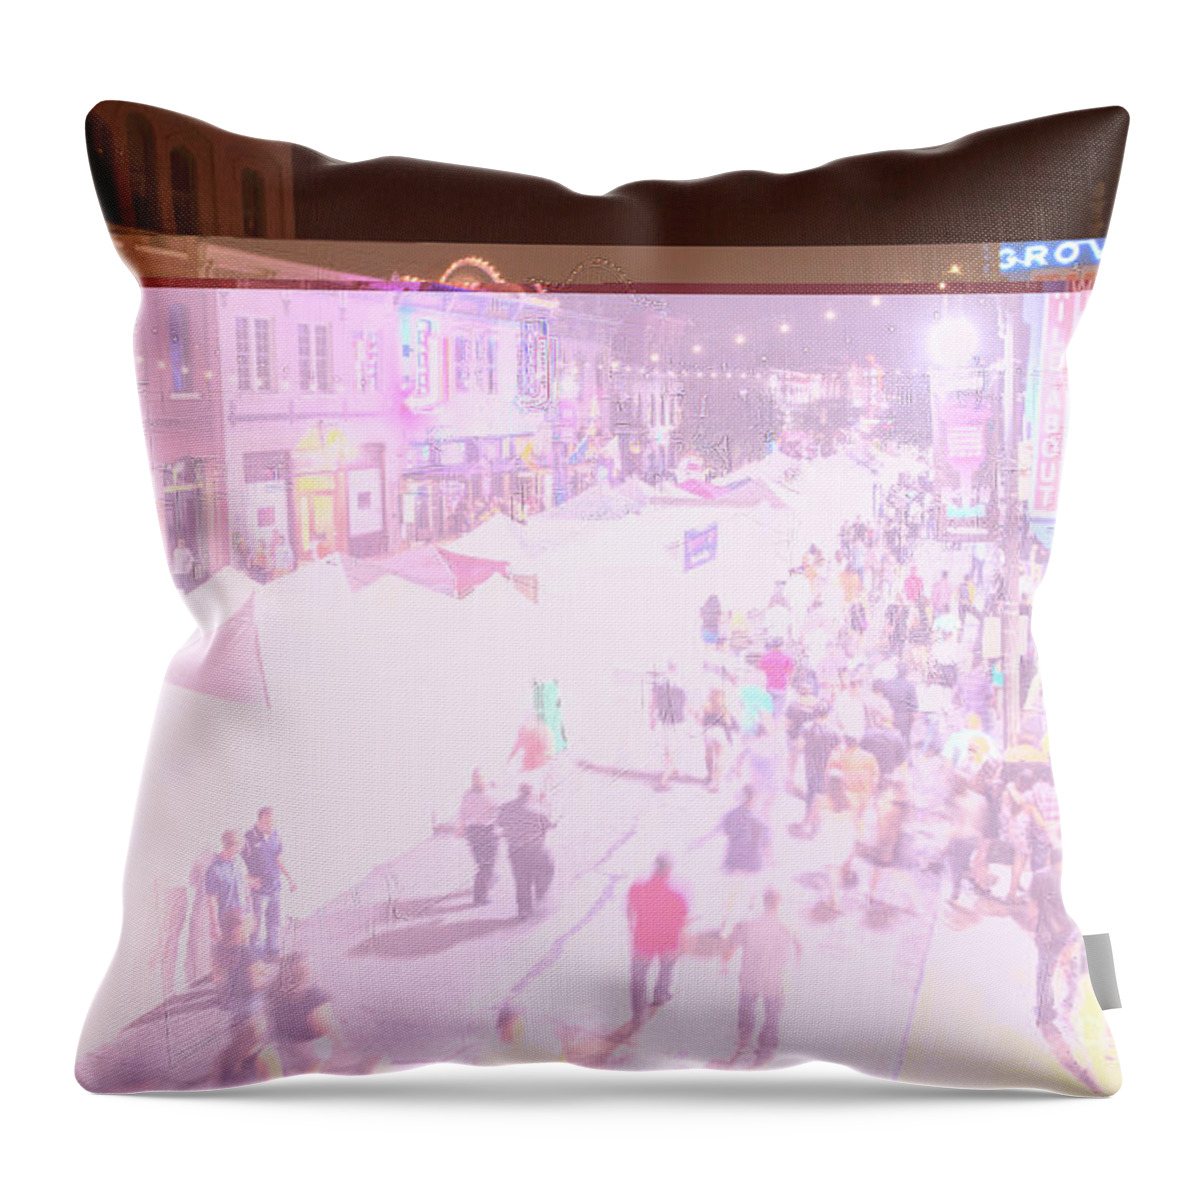 Pecan Street Festival Throw Pillow featuring the photograph Vendor tents line the streets during the Pecan Street Art Festival as thousands of people fill the streets and go bar hopping on 6th Street by Dan Herron